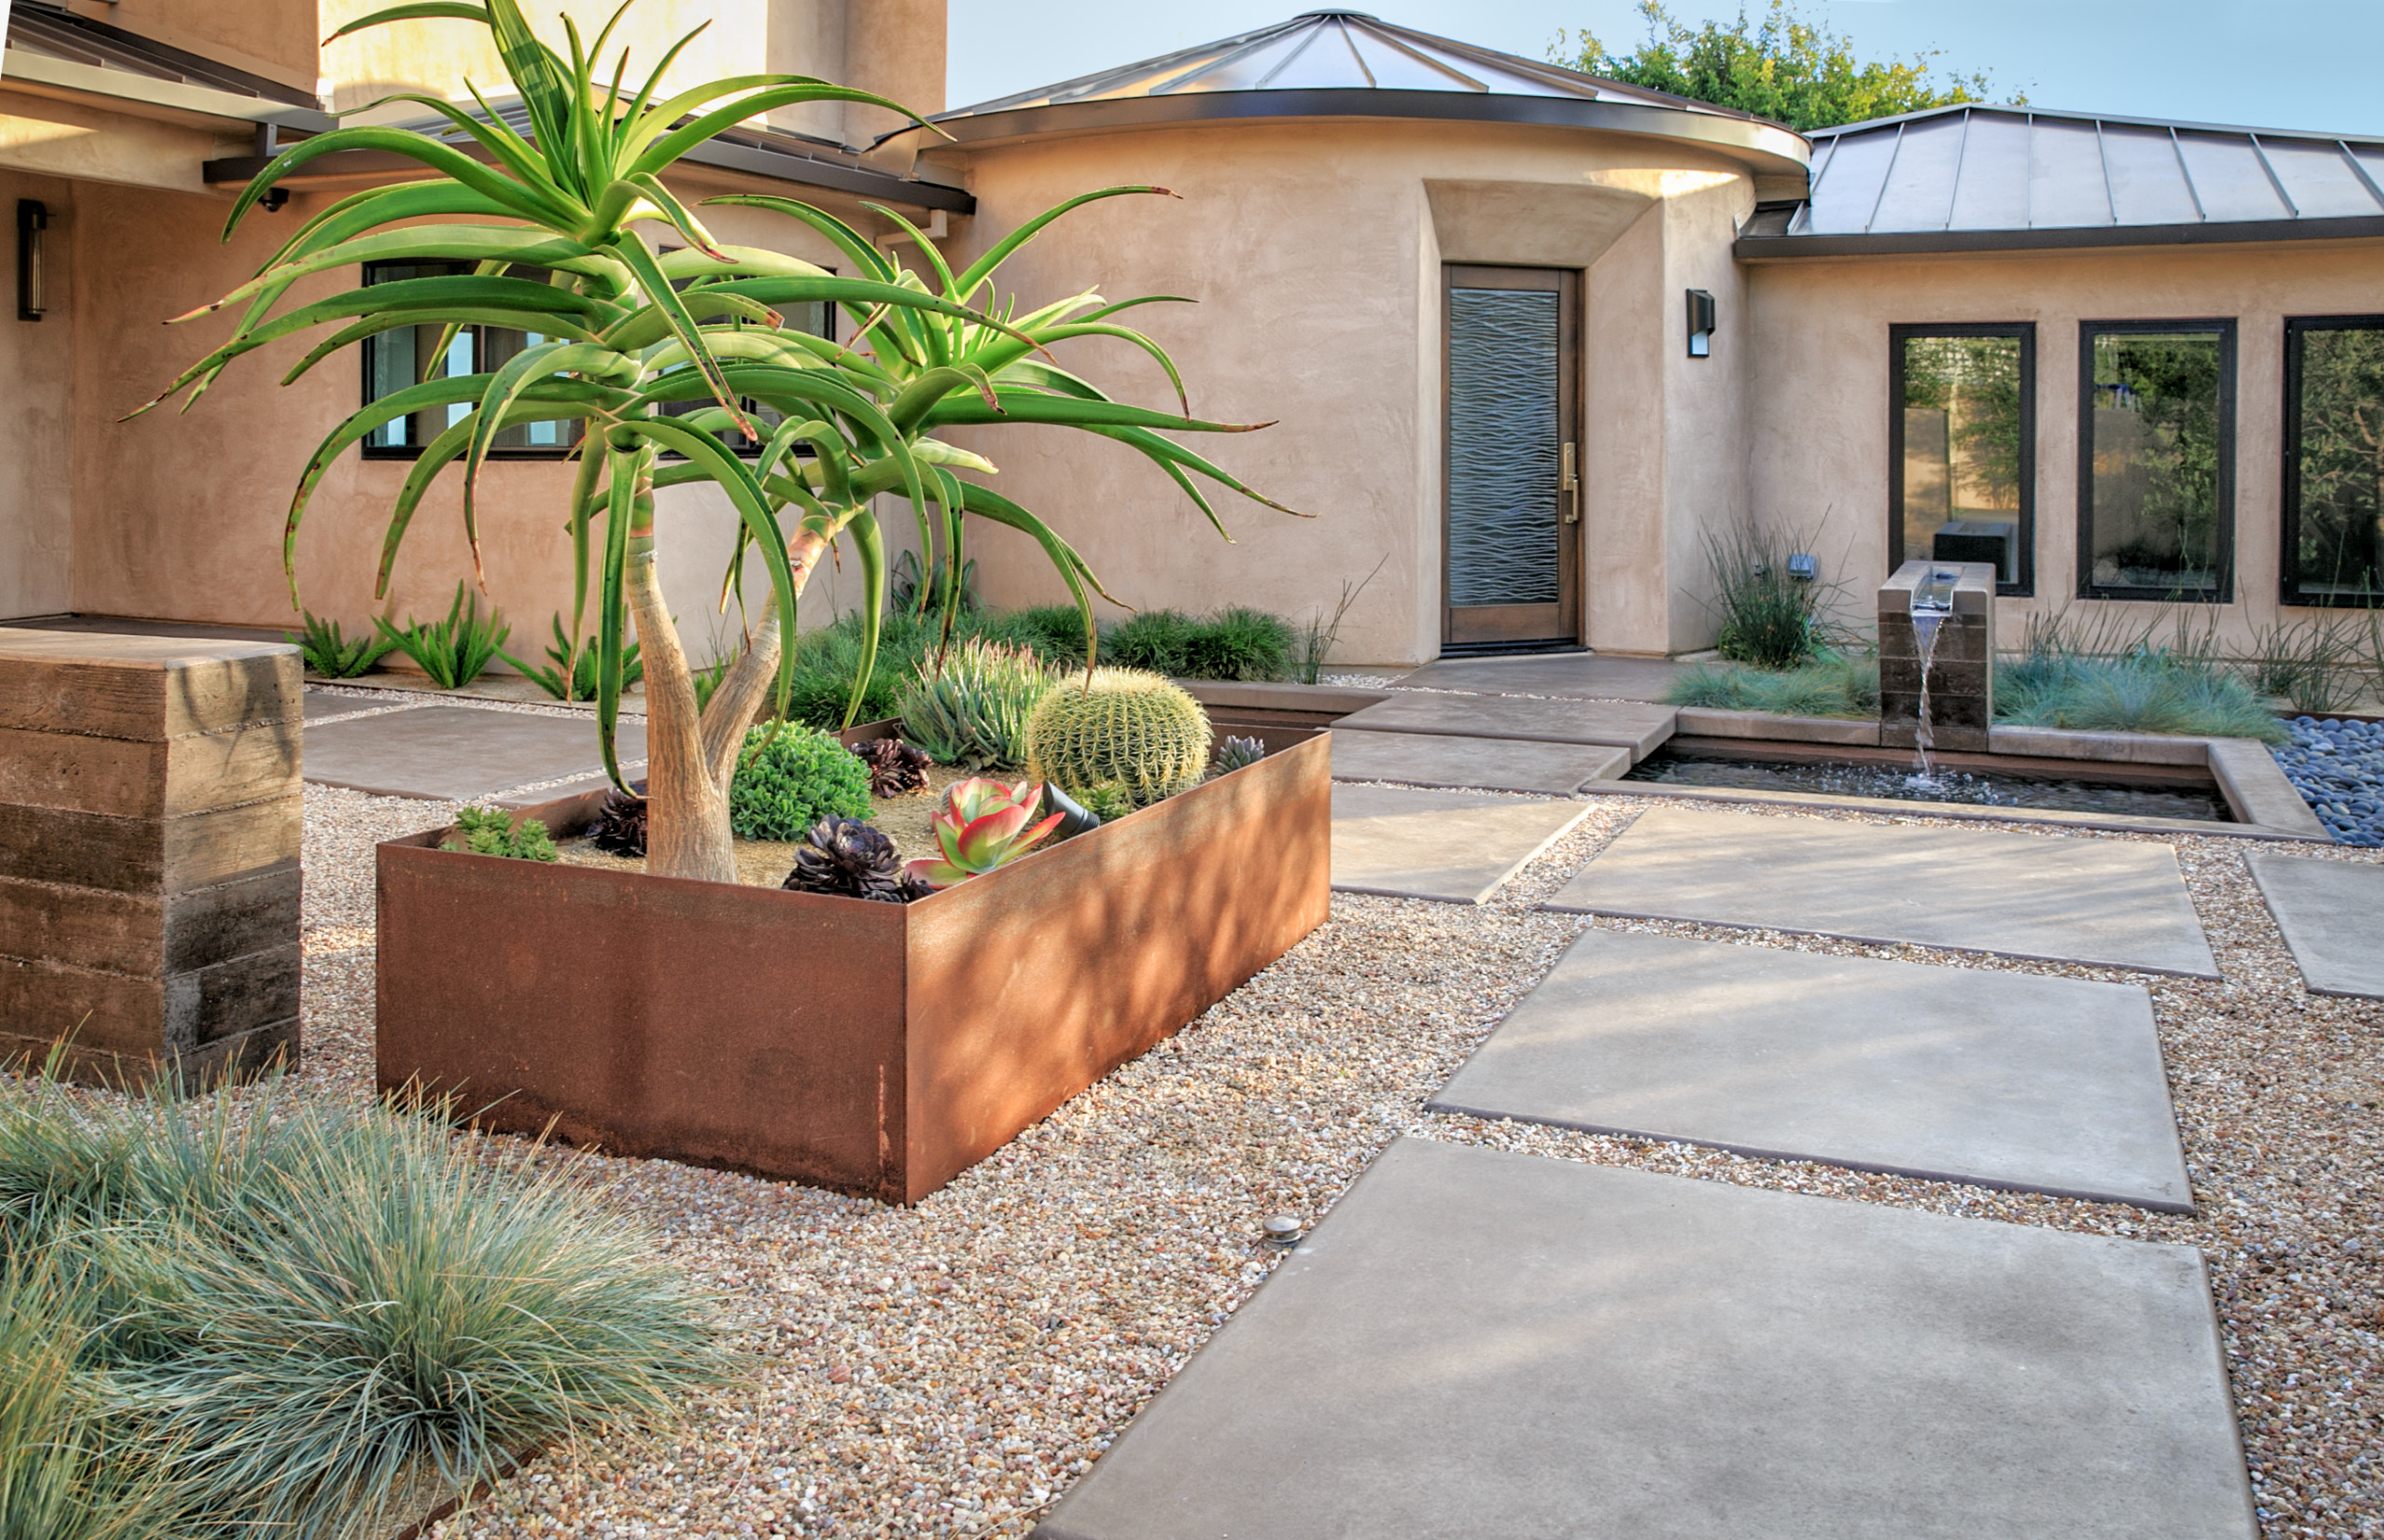 75 Beautiful Front Yard Landscaping Pictures Ideas Houzz